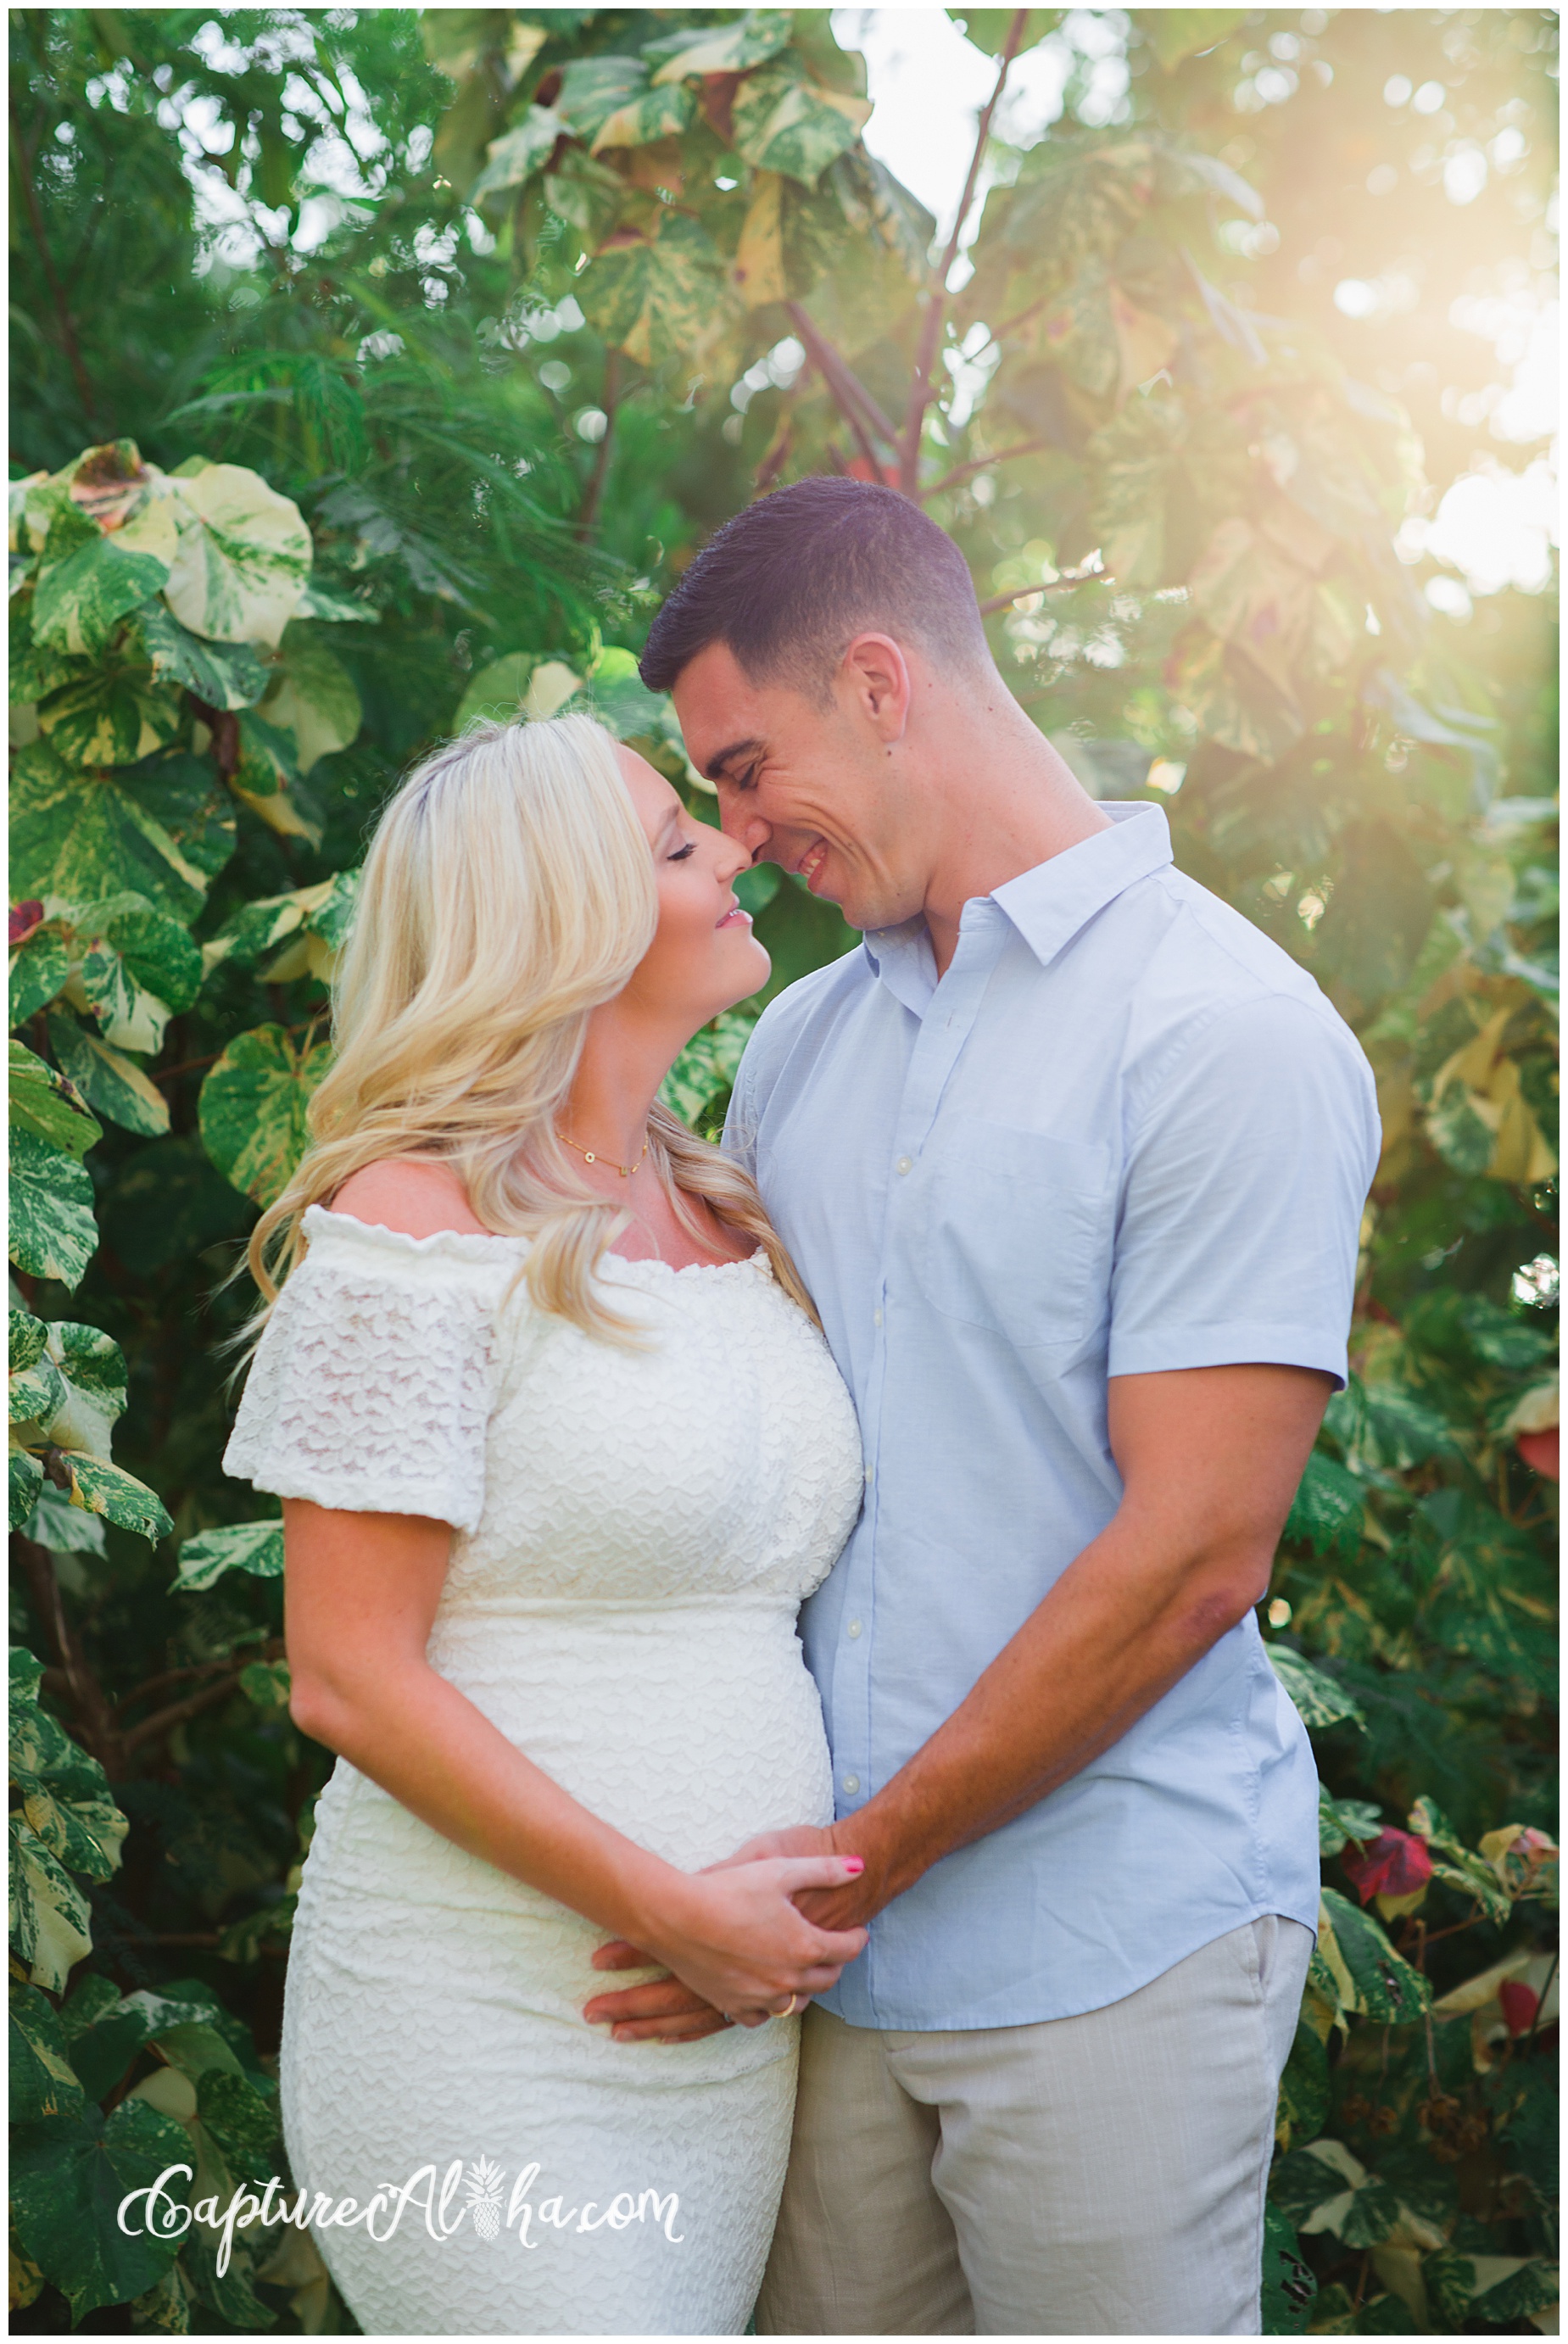 Wife and husband on a maternity photoshoot in Maui with greenery in the backgroun